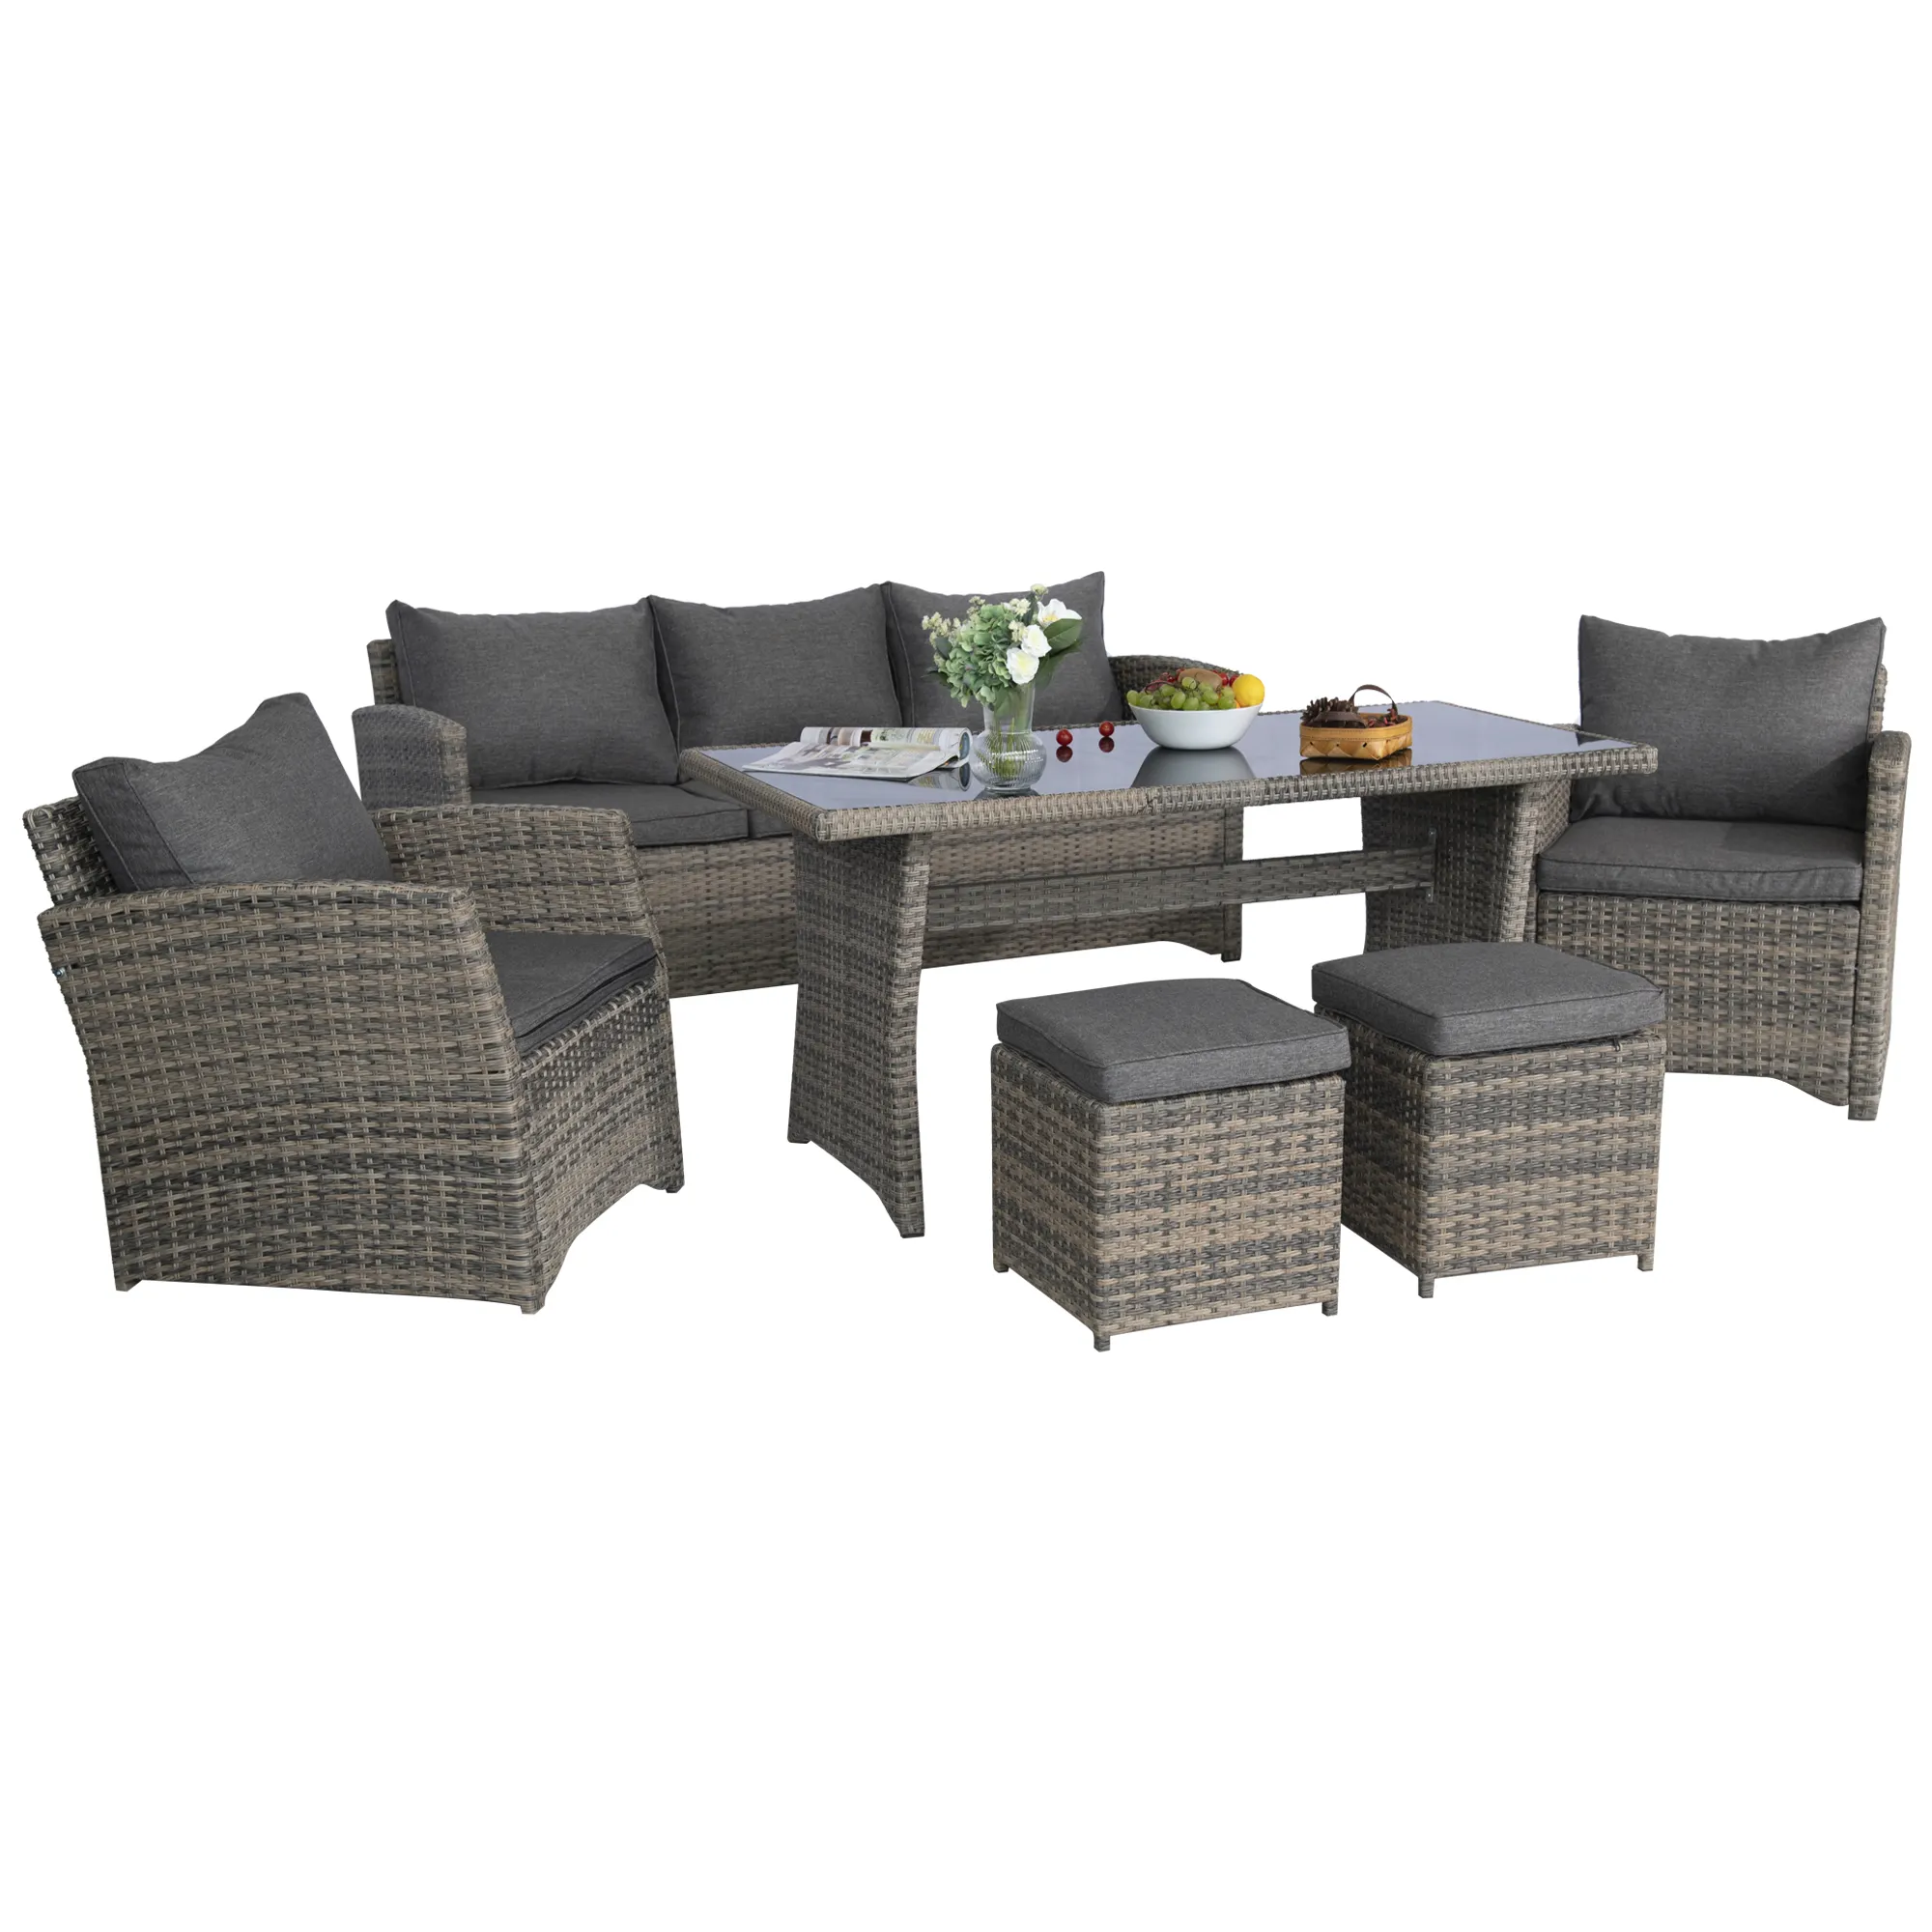 Outdoor Dining Table and Chair Modern Garden Furniture Set Luxury Commercial Hotel Restaurant Frame Style Living Fabric Packing